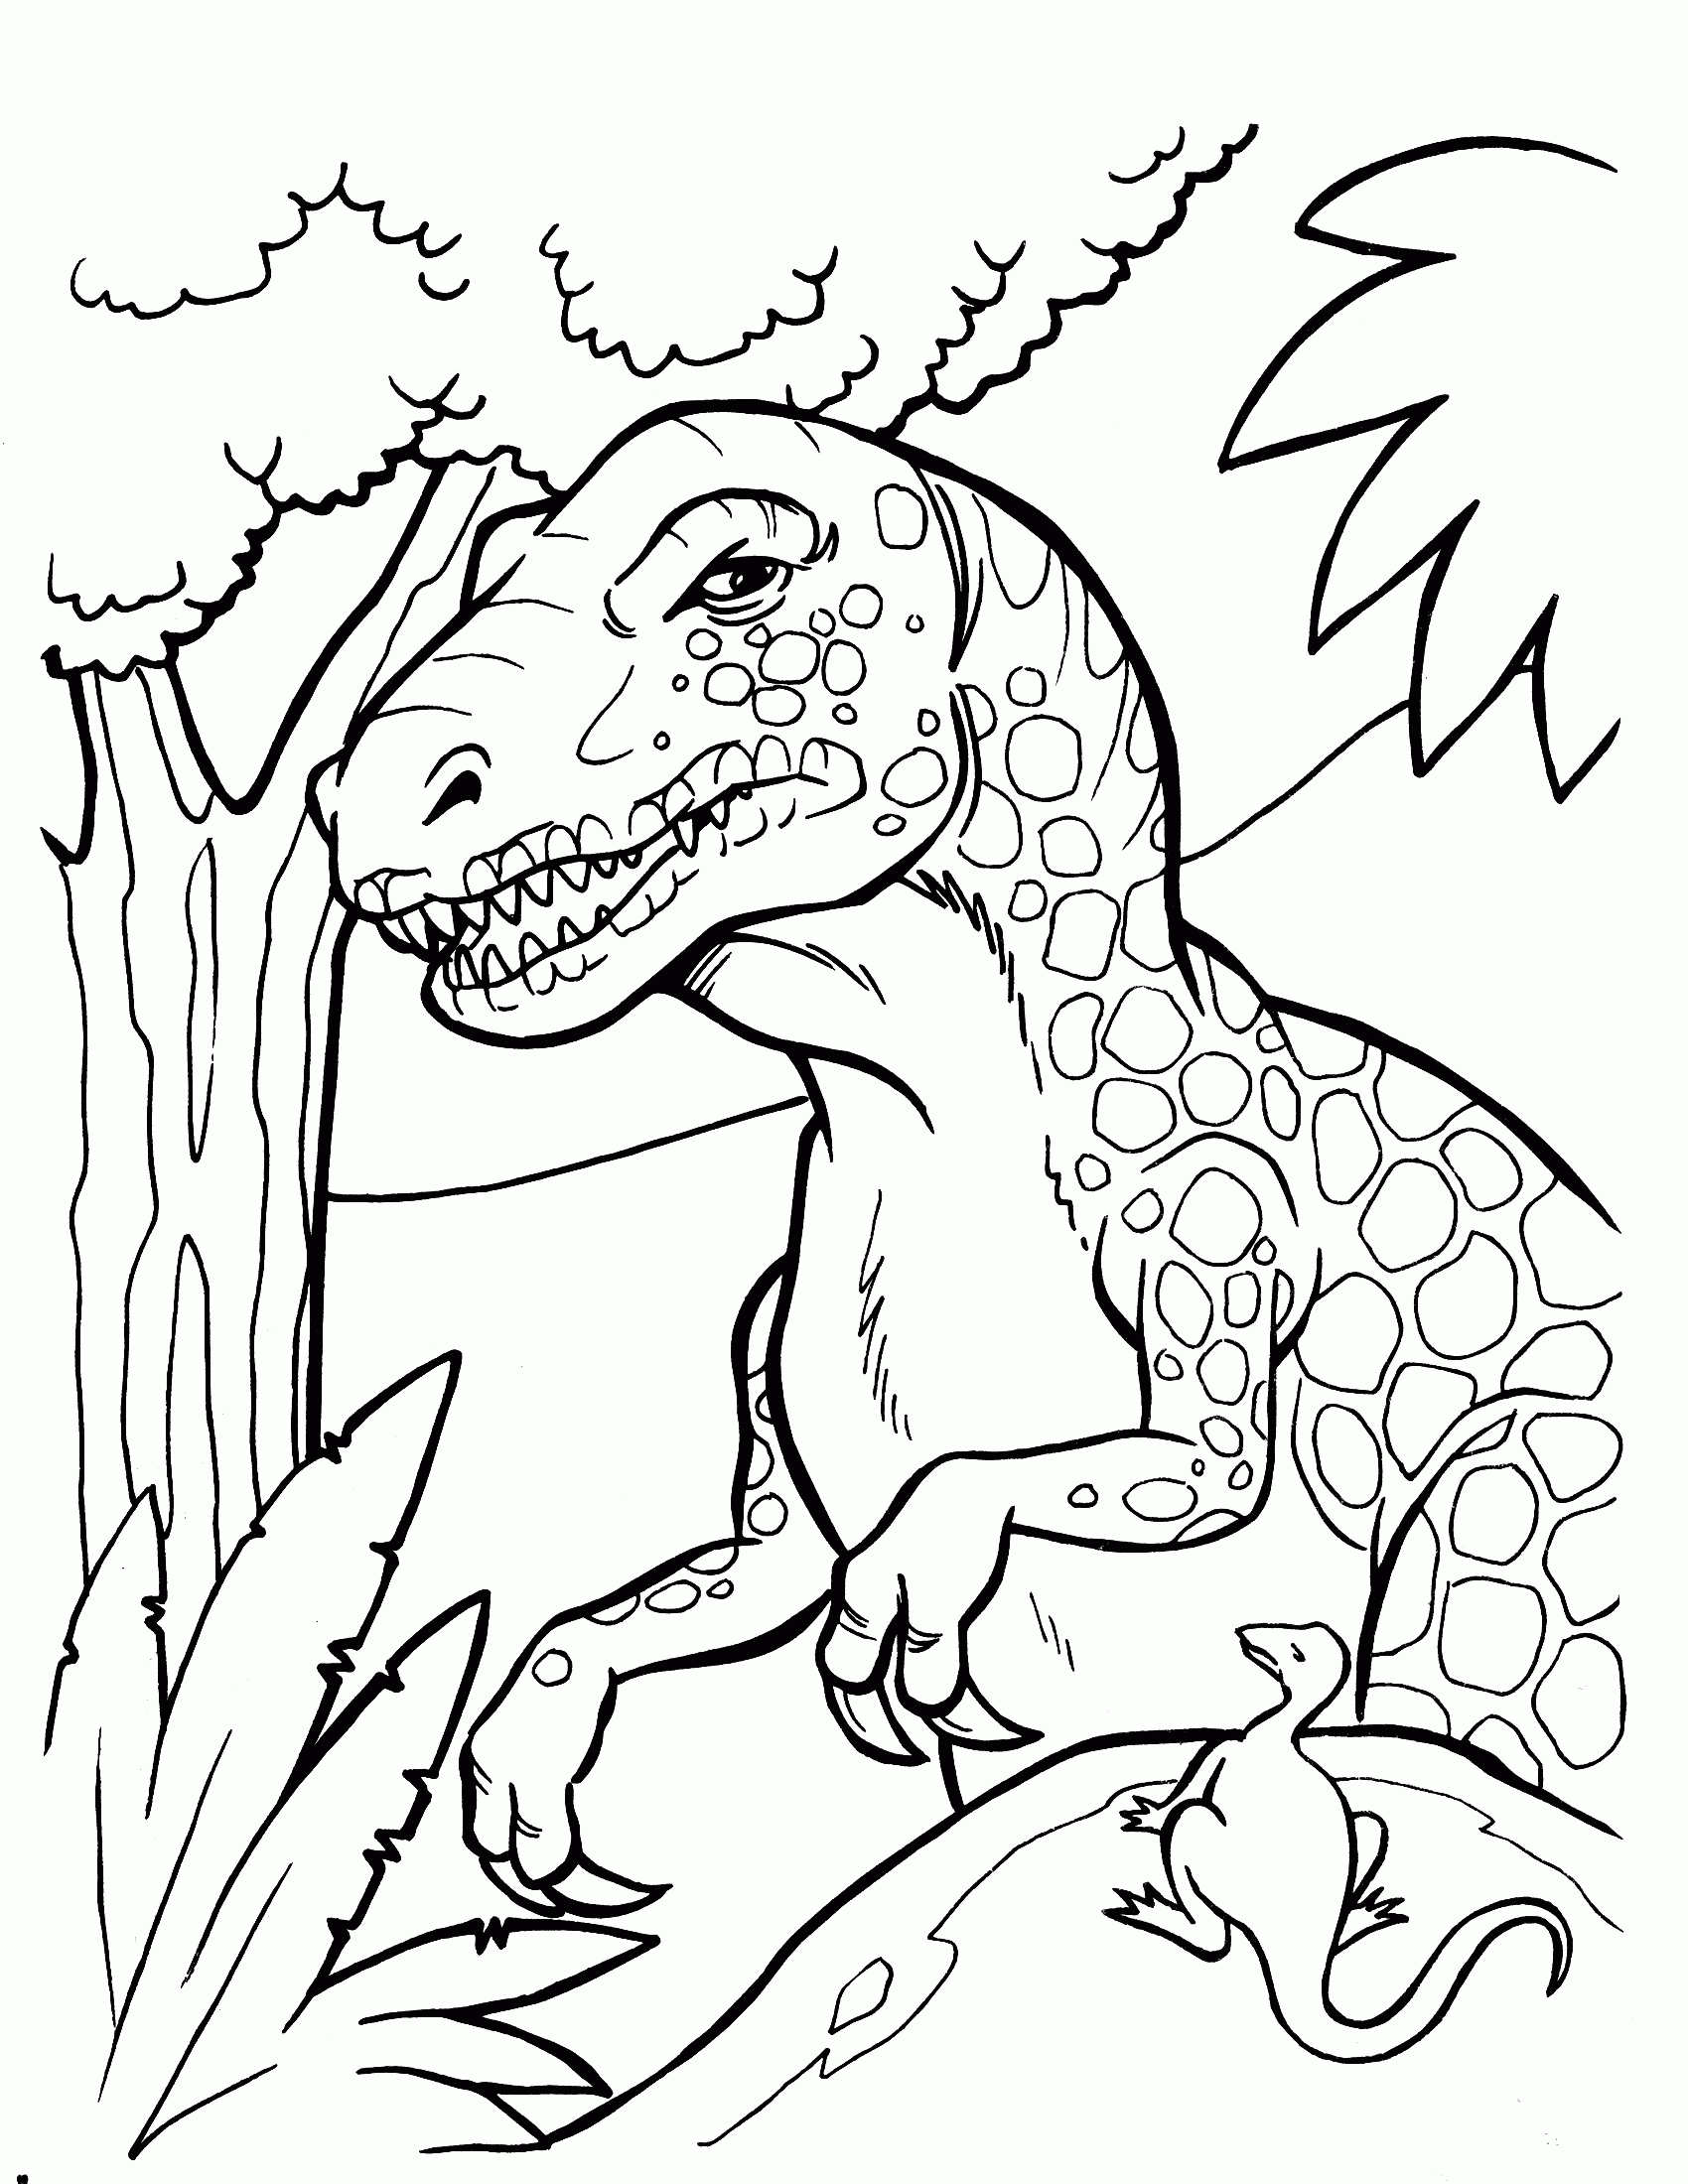 Amazing Of Dinosaurs Coloring Pages Free Printables About 20 ...